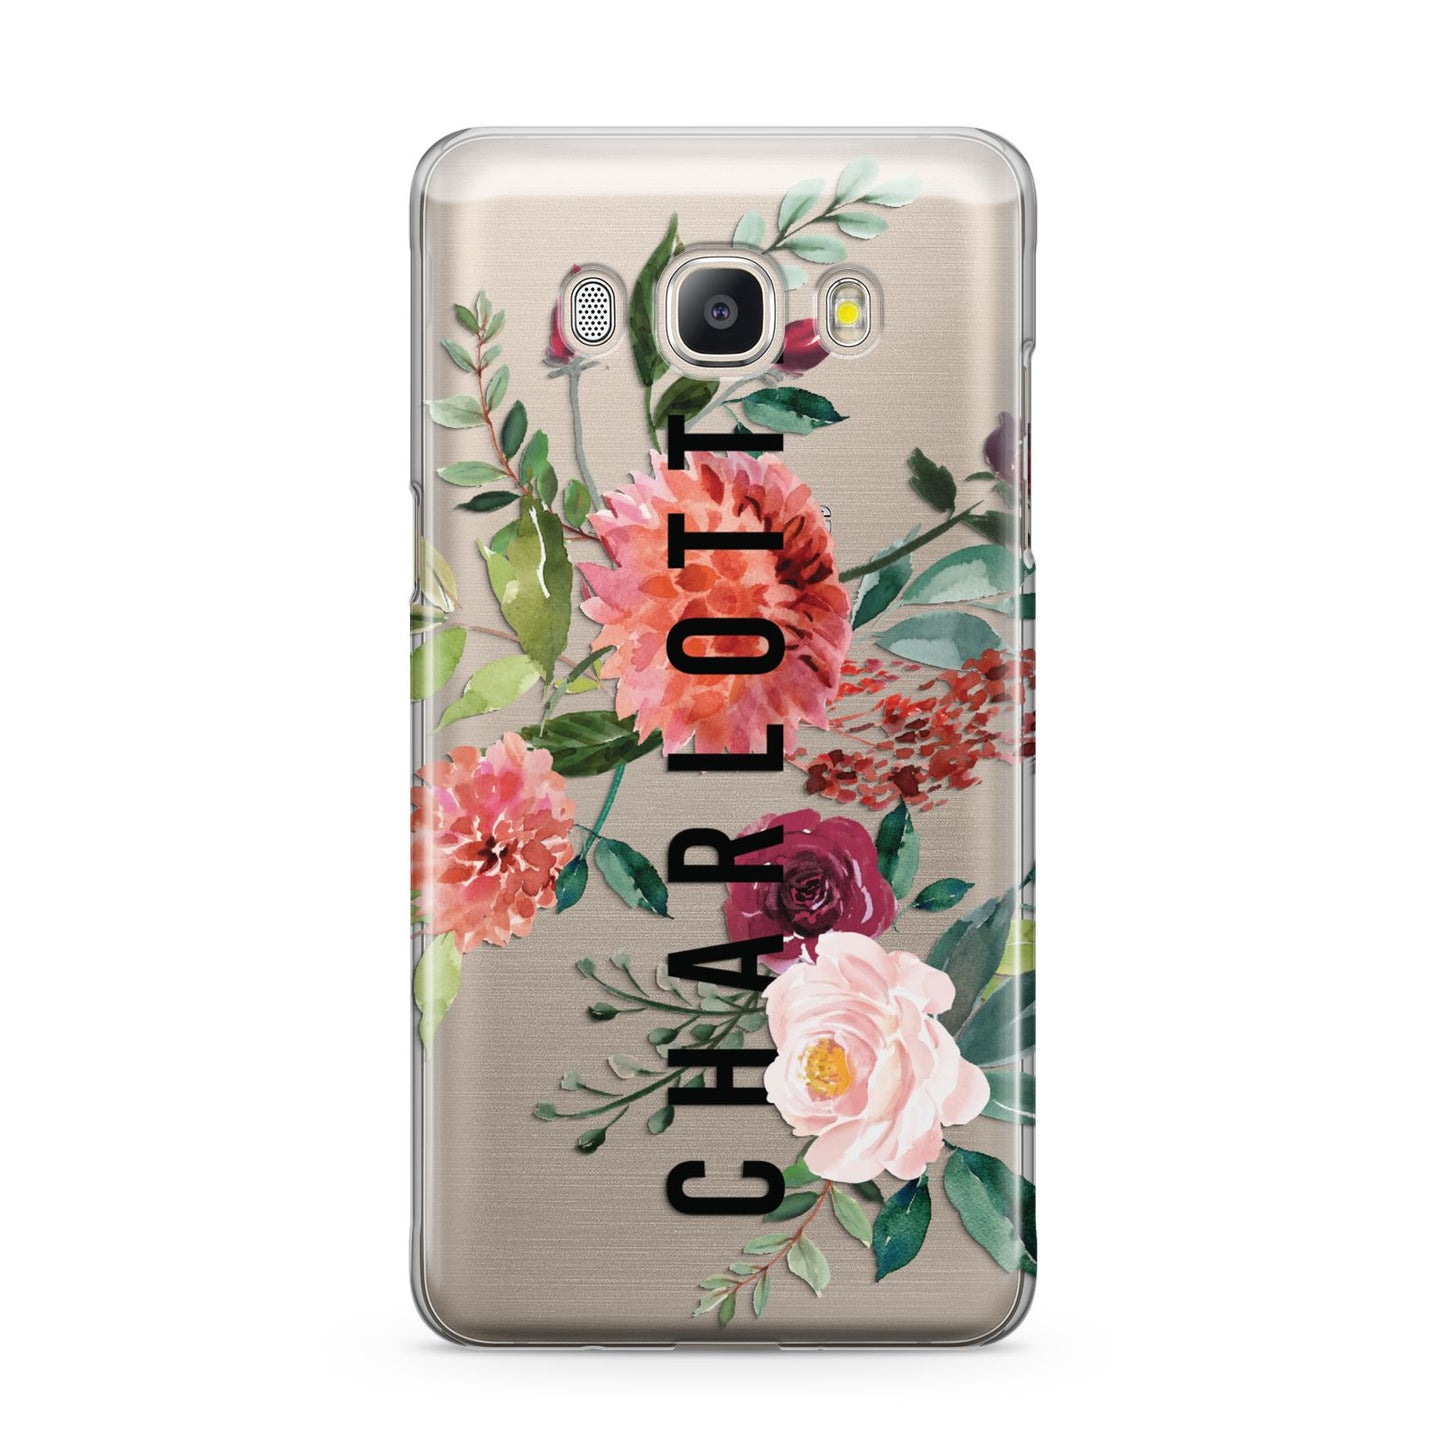 Personalised Side Name Clear Floral Samsung Galaxy J5 2016 Case